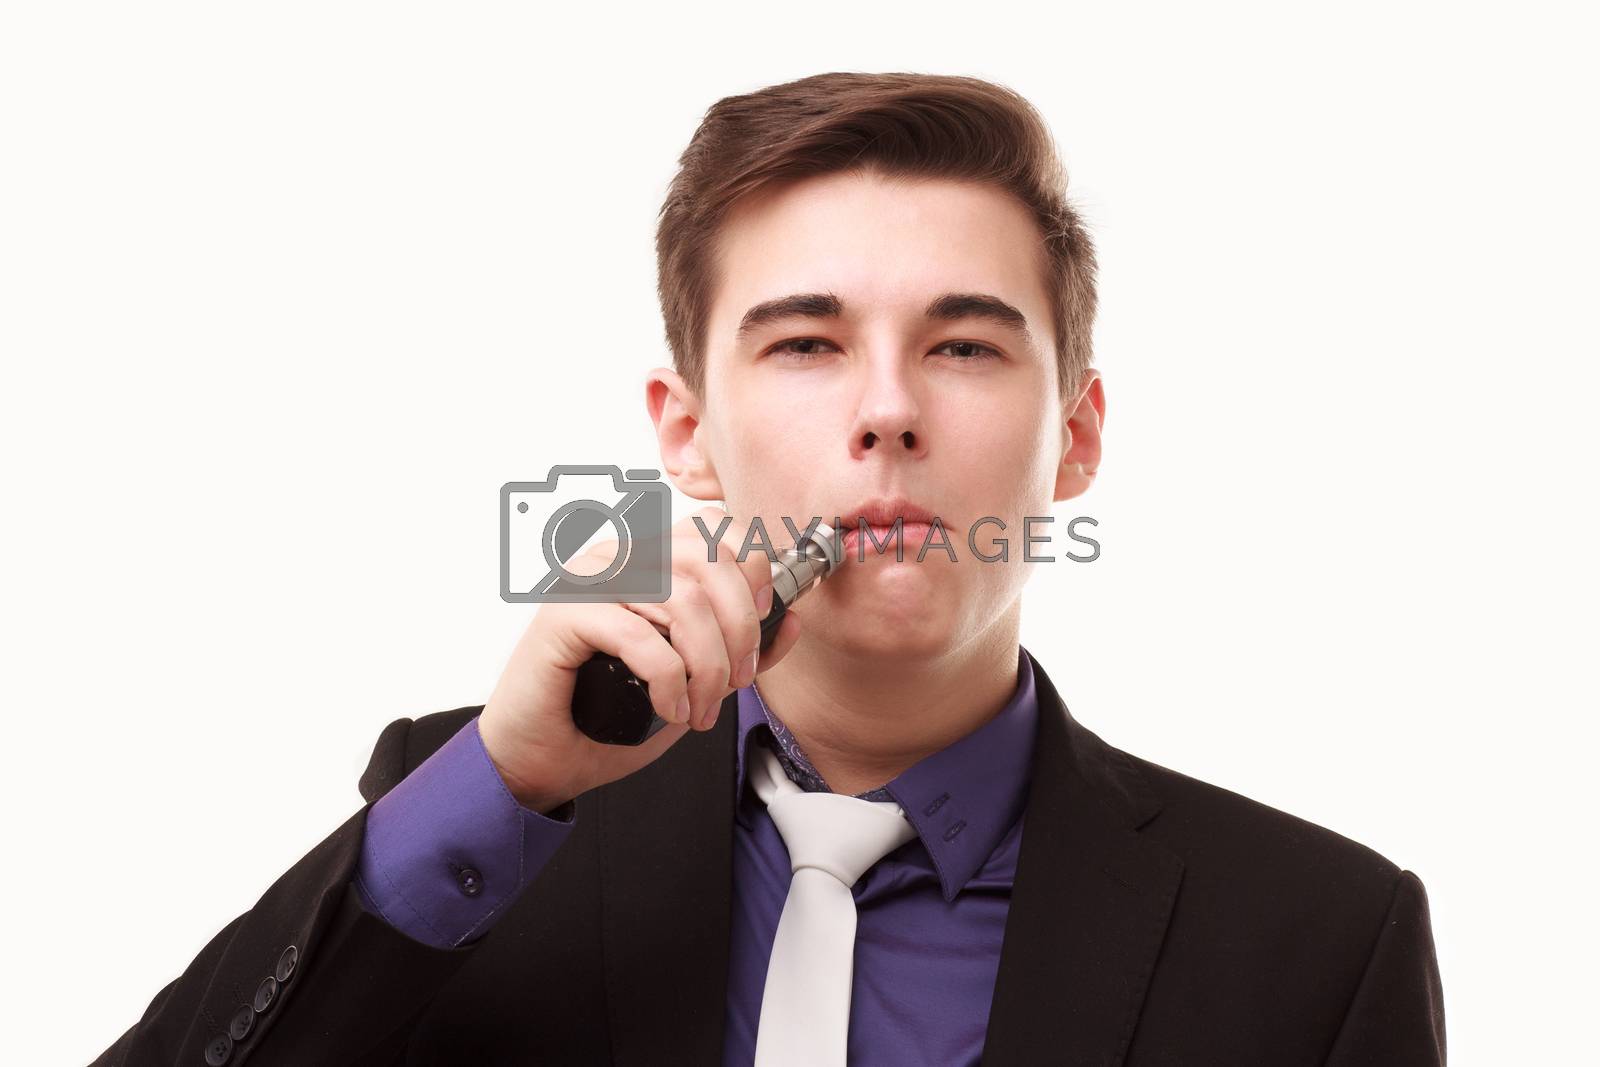 Royalty free image of Portrait of a man in suit smoking an e-cigarette by DmitryOsipov